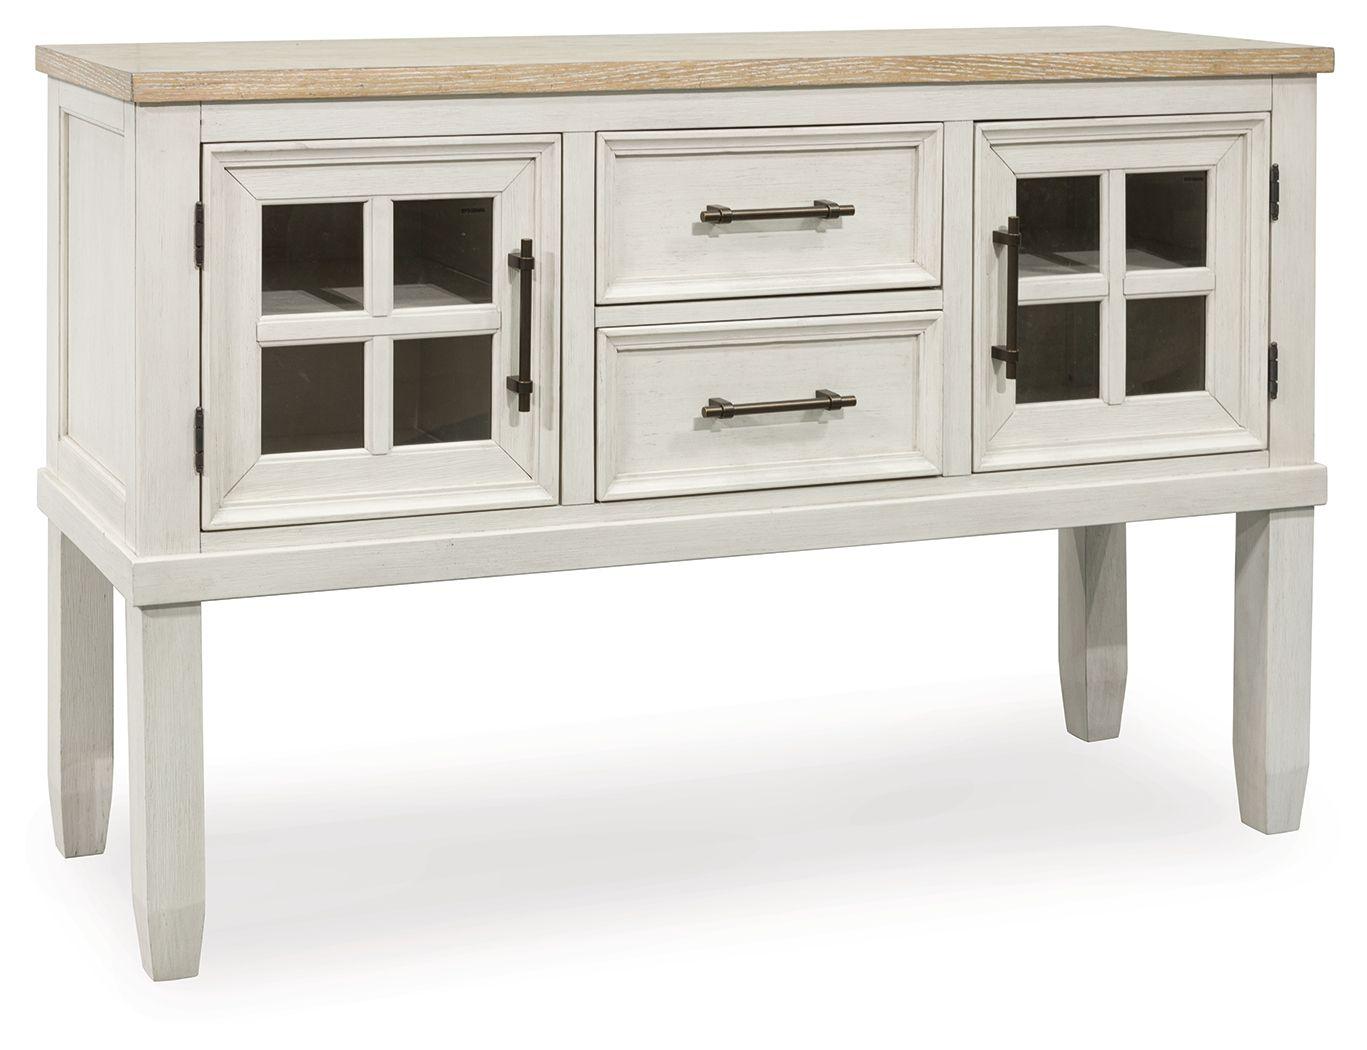 Benchcraft® - Shaybrock - Antique White / Brown - Dining Room Server - 5th Avenue Furniture